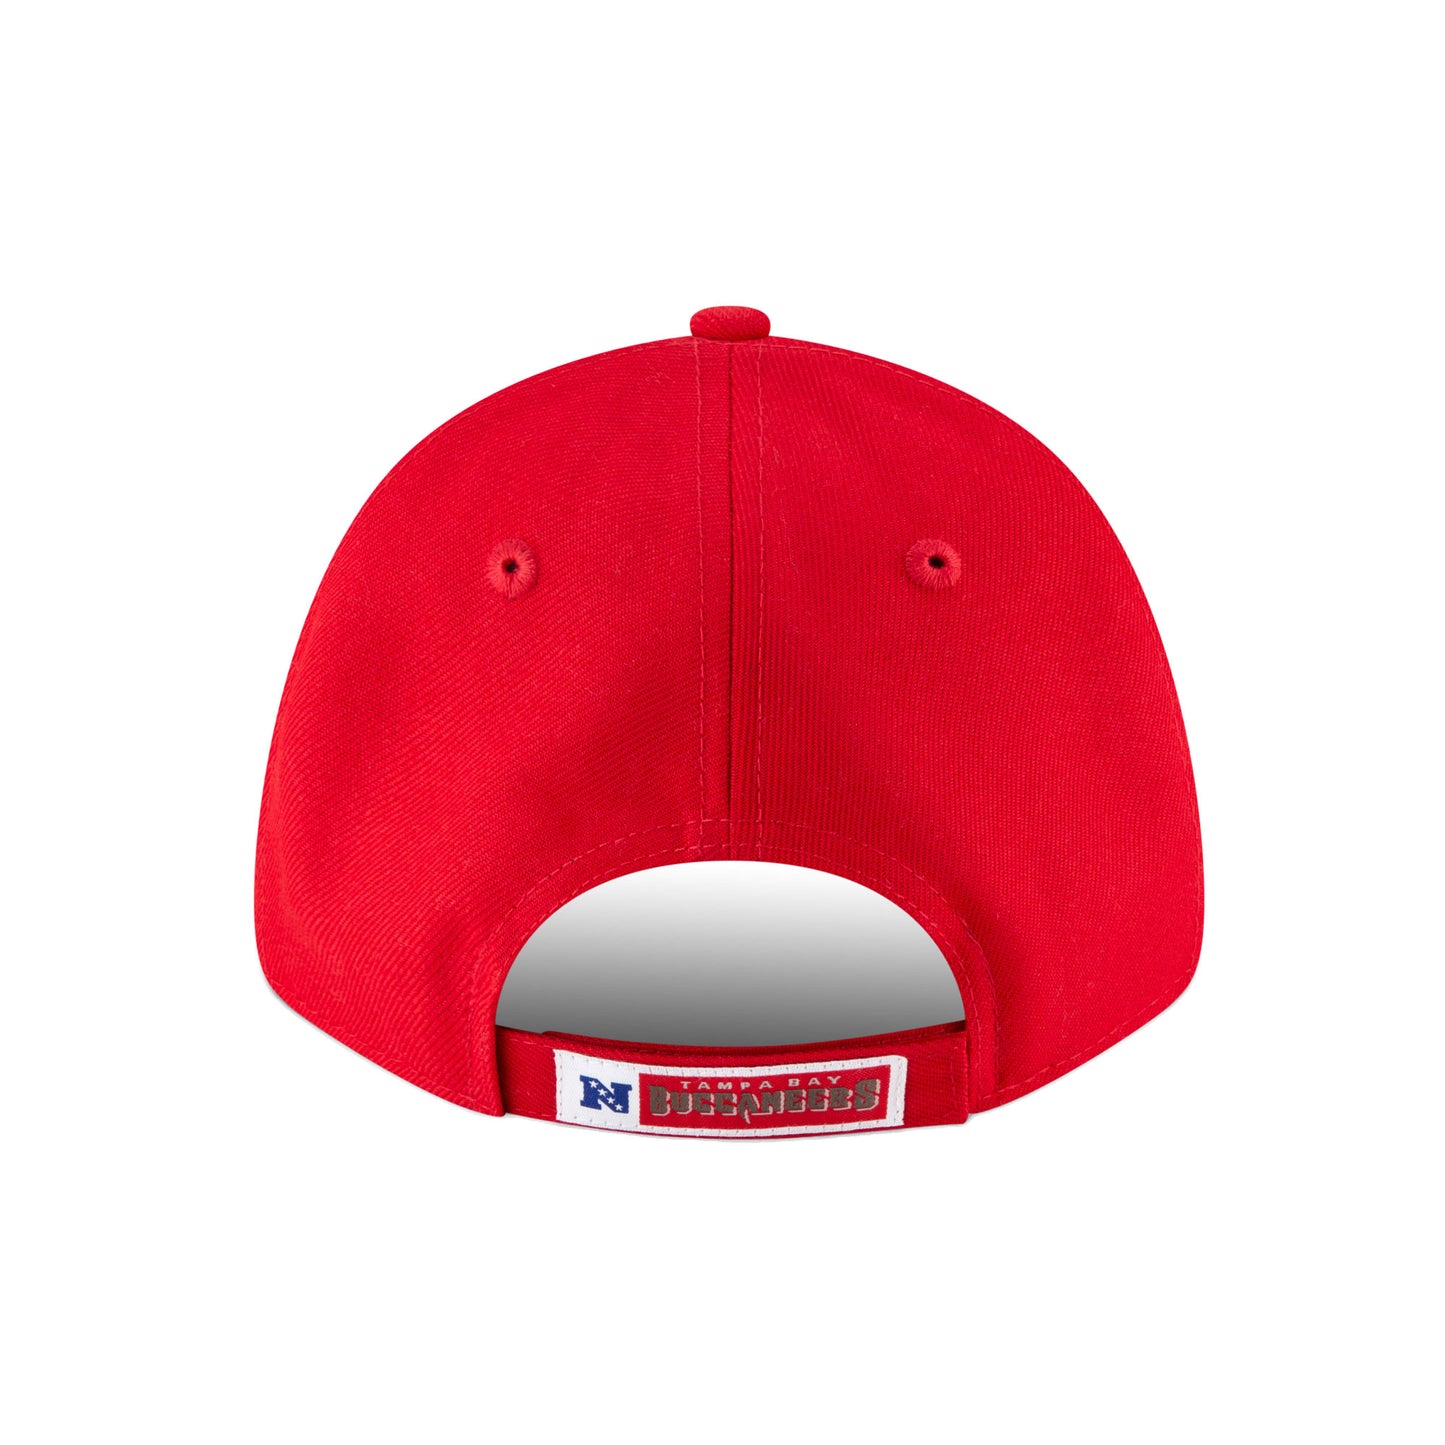 THE LEAGUE Tampa Bay Buccaneers 9FORTY New Era Cap